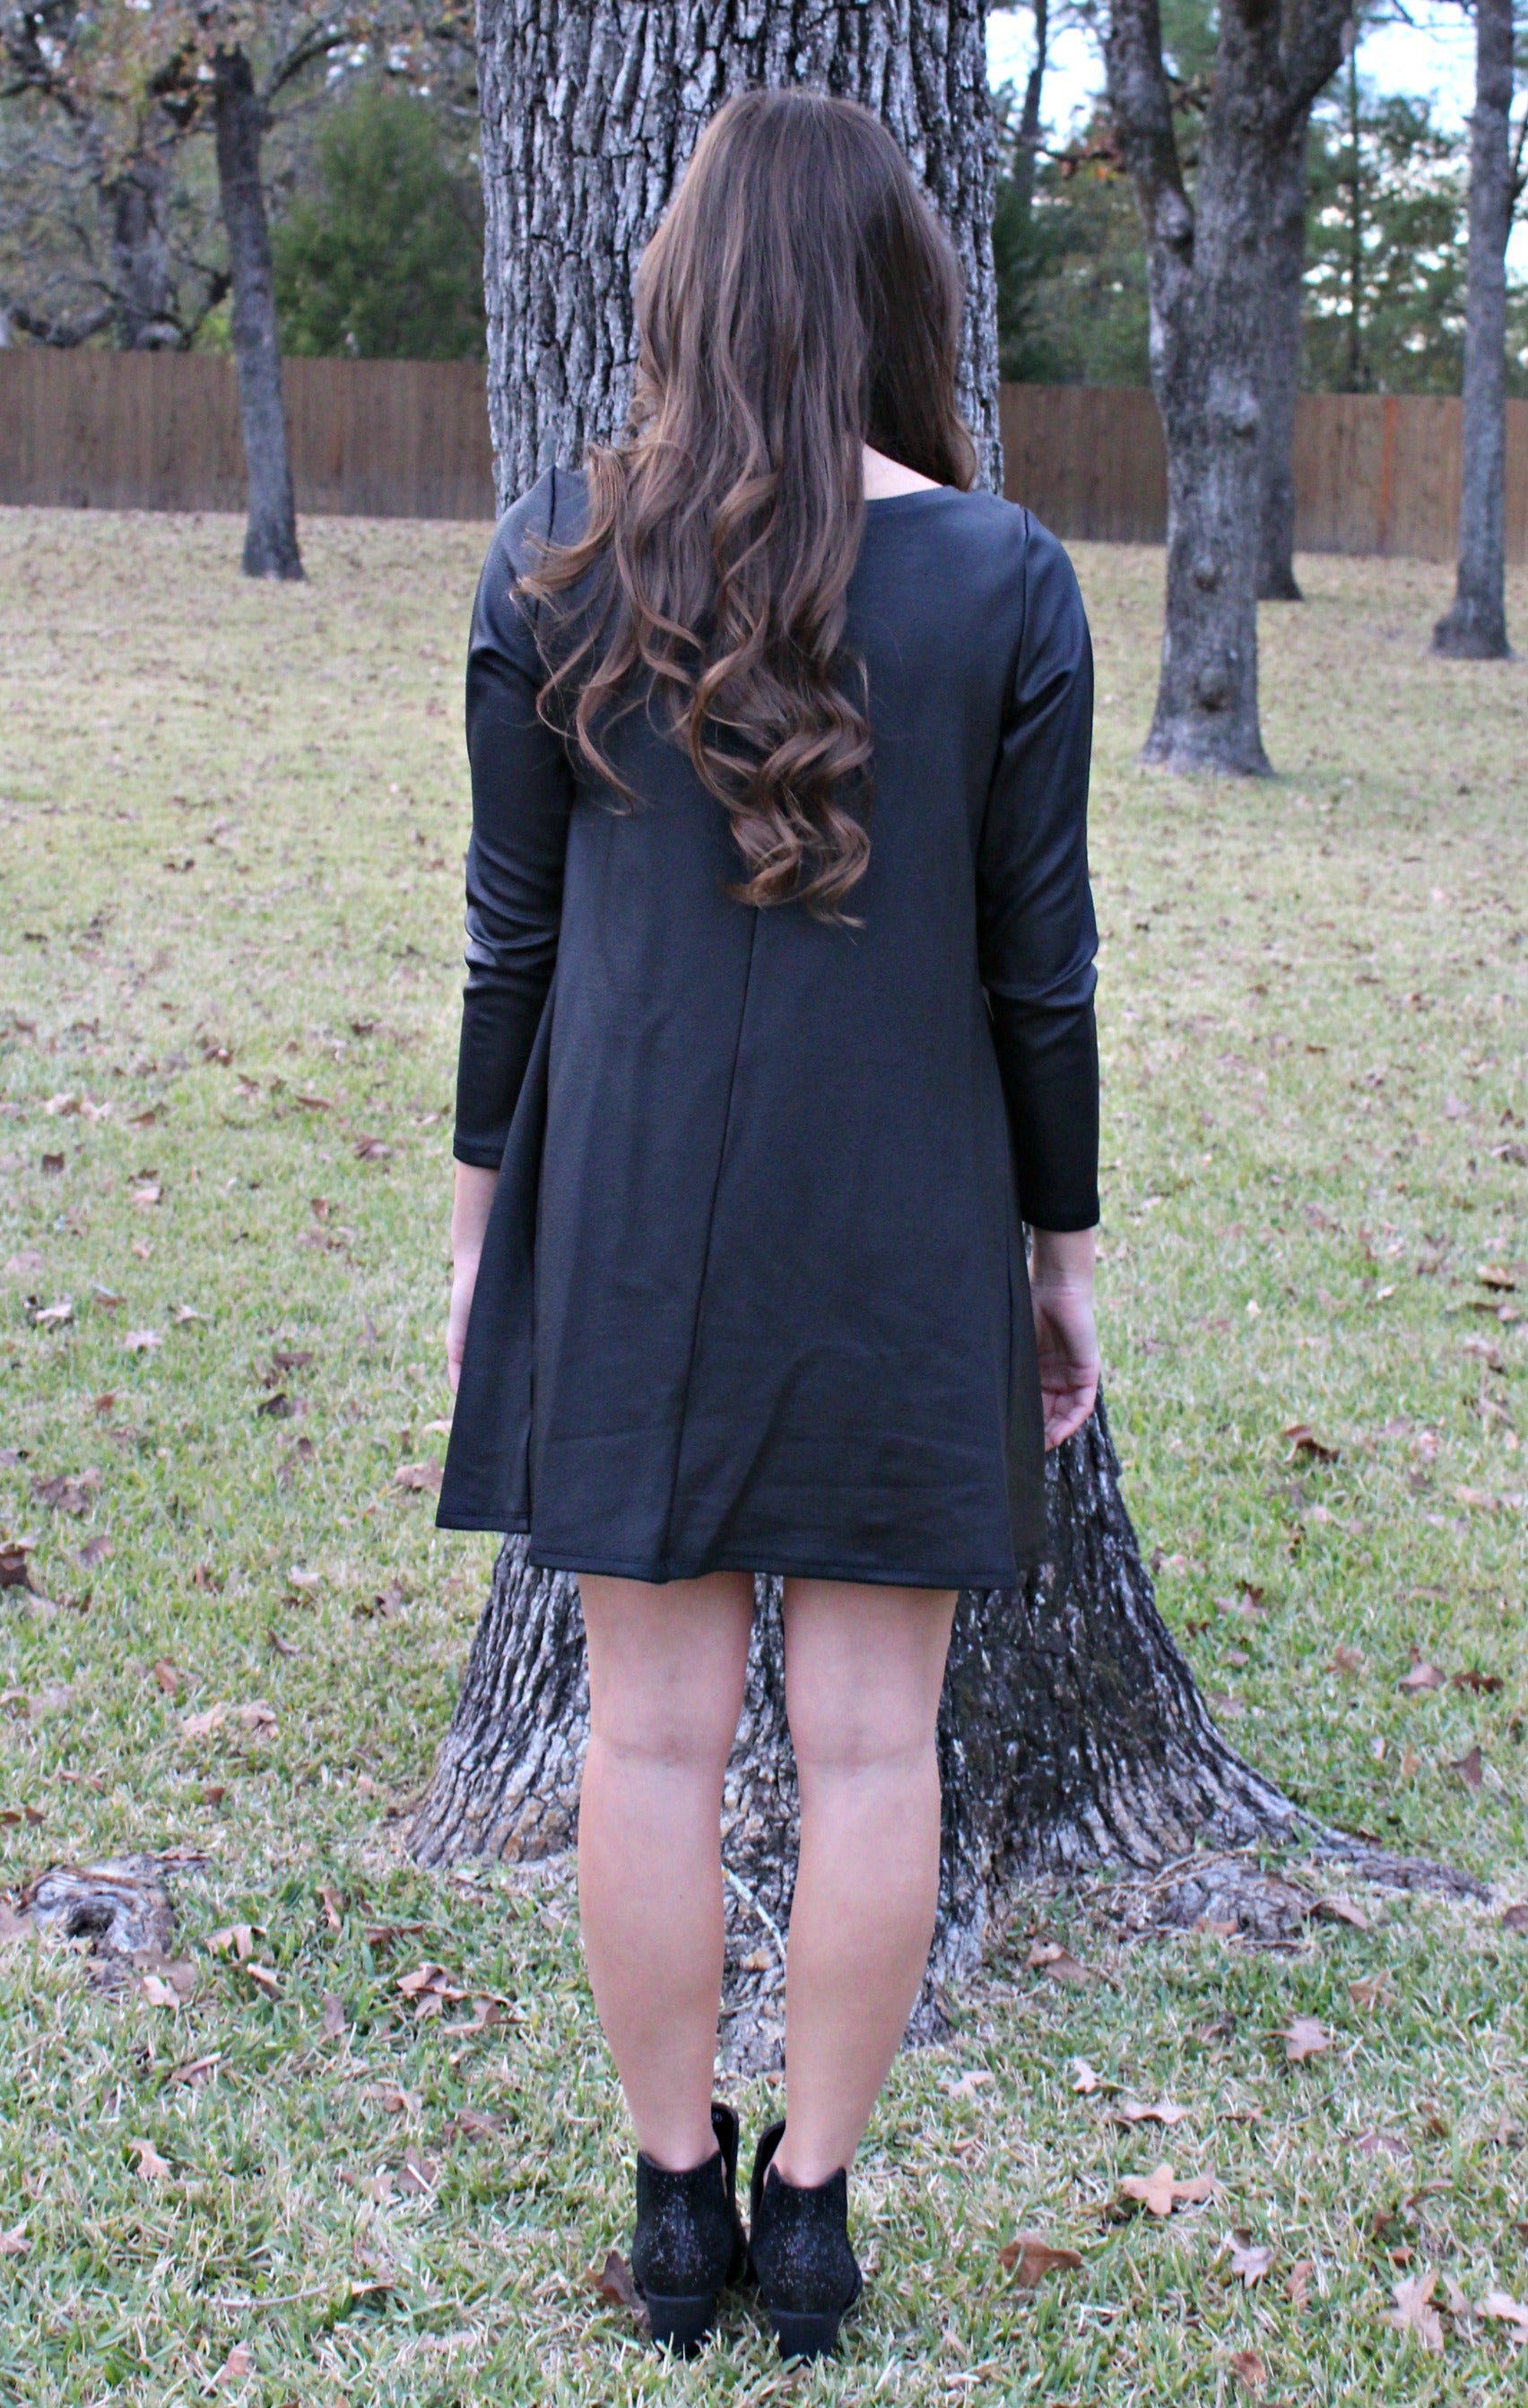 Stop and Stare Textured Faux Leather Long Sleeve Dress in Black - Giddy Up Glamour Boutique